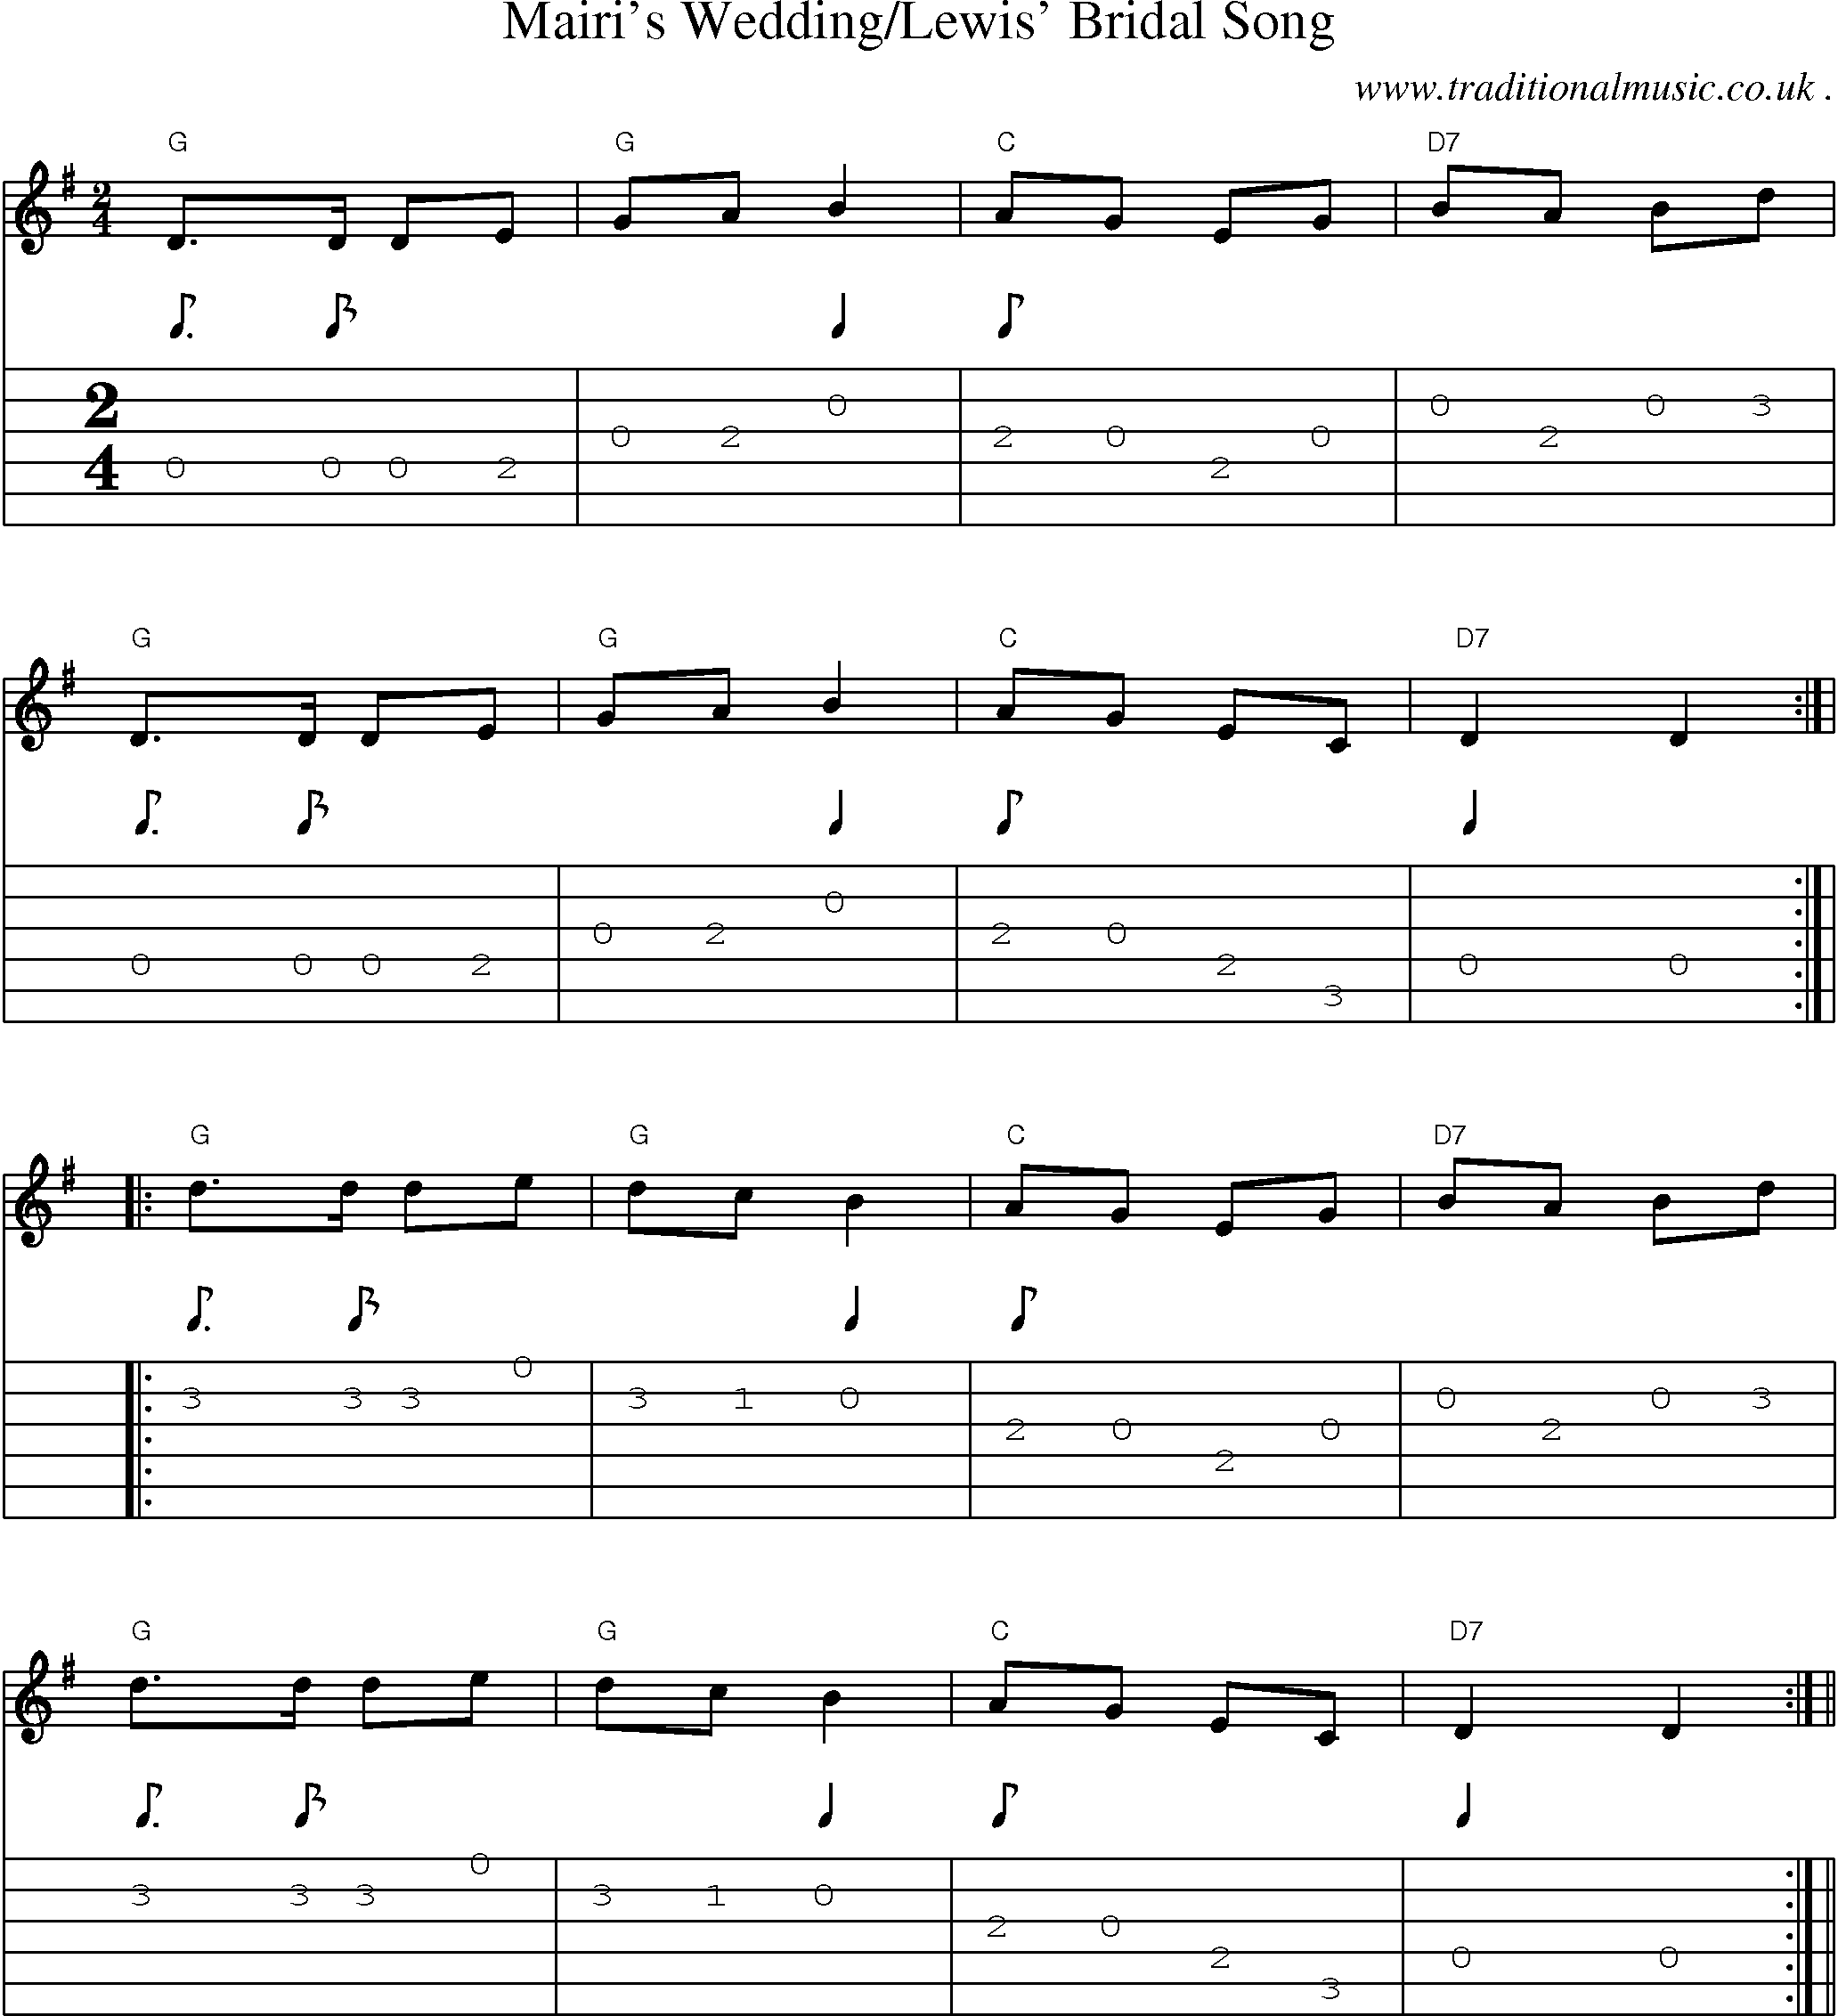 Music Score and Guitar Tabs for Mairis Weddinglewis Bridal Song